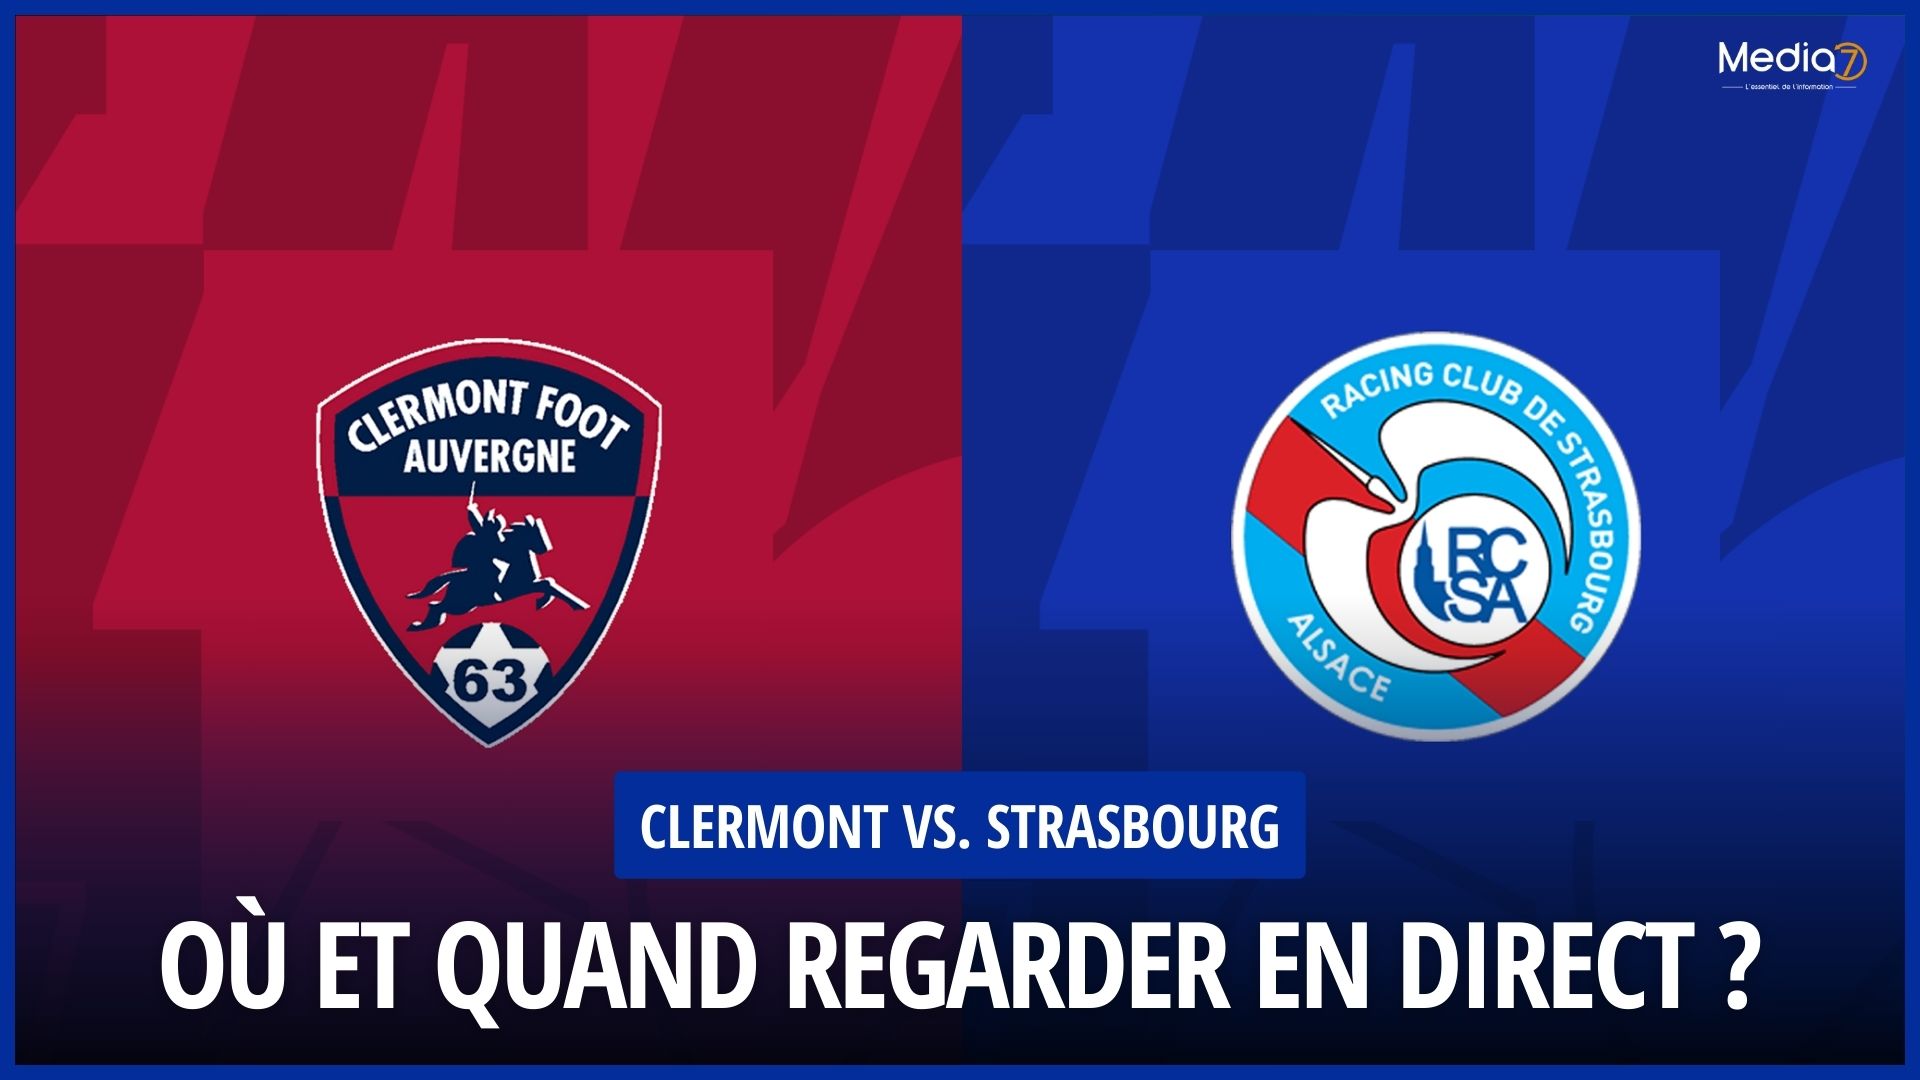 Live Broadcast: Clermont vs. Strasbourg - TV Channel, Streaming, Schedule - Media7